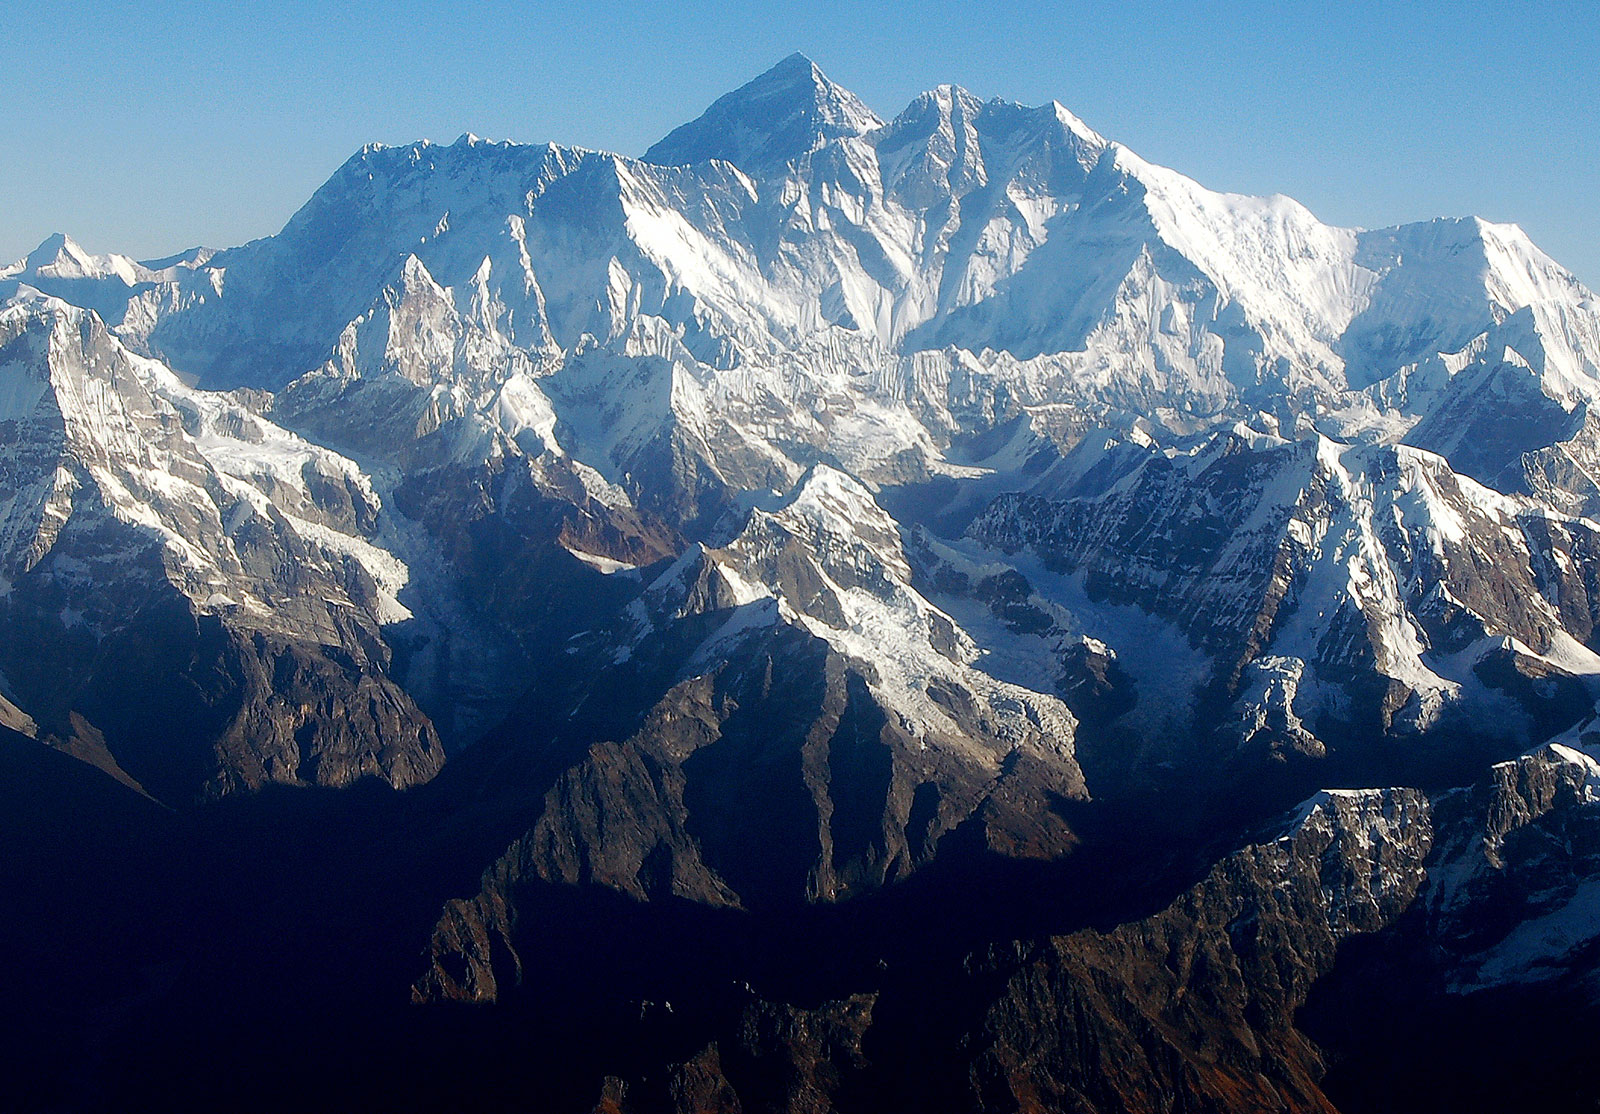 Nepal grants permission to 204 climbers from 42 countries to climb Mount Everest this season